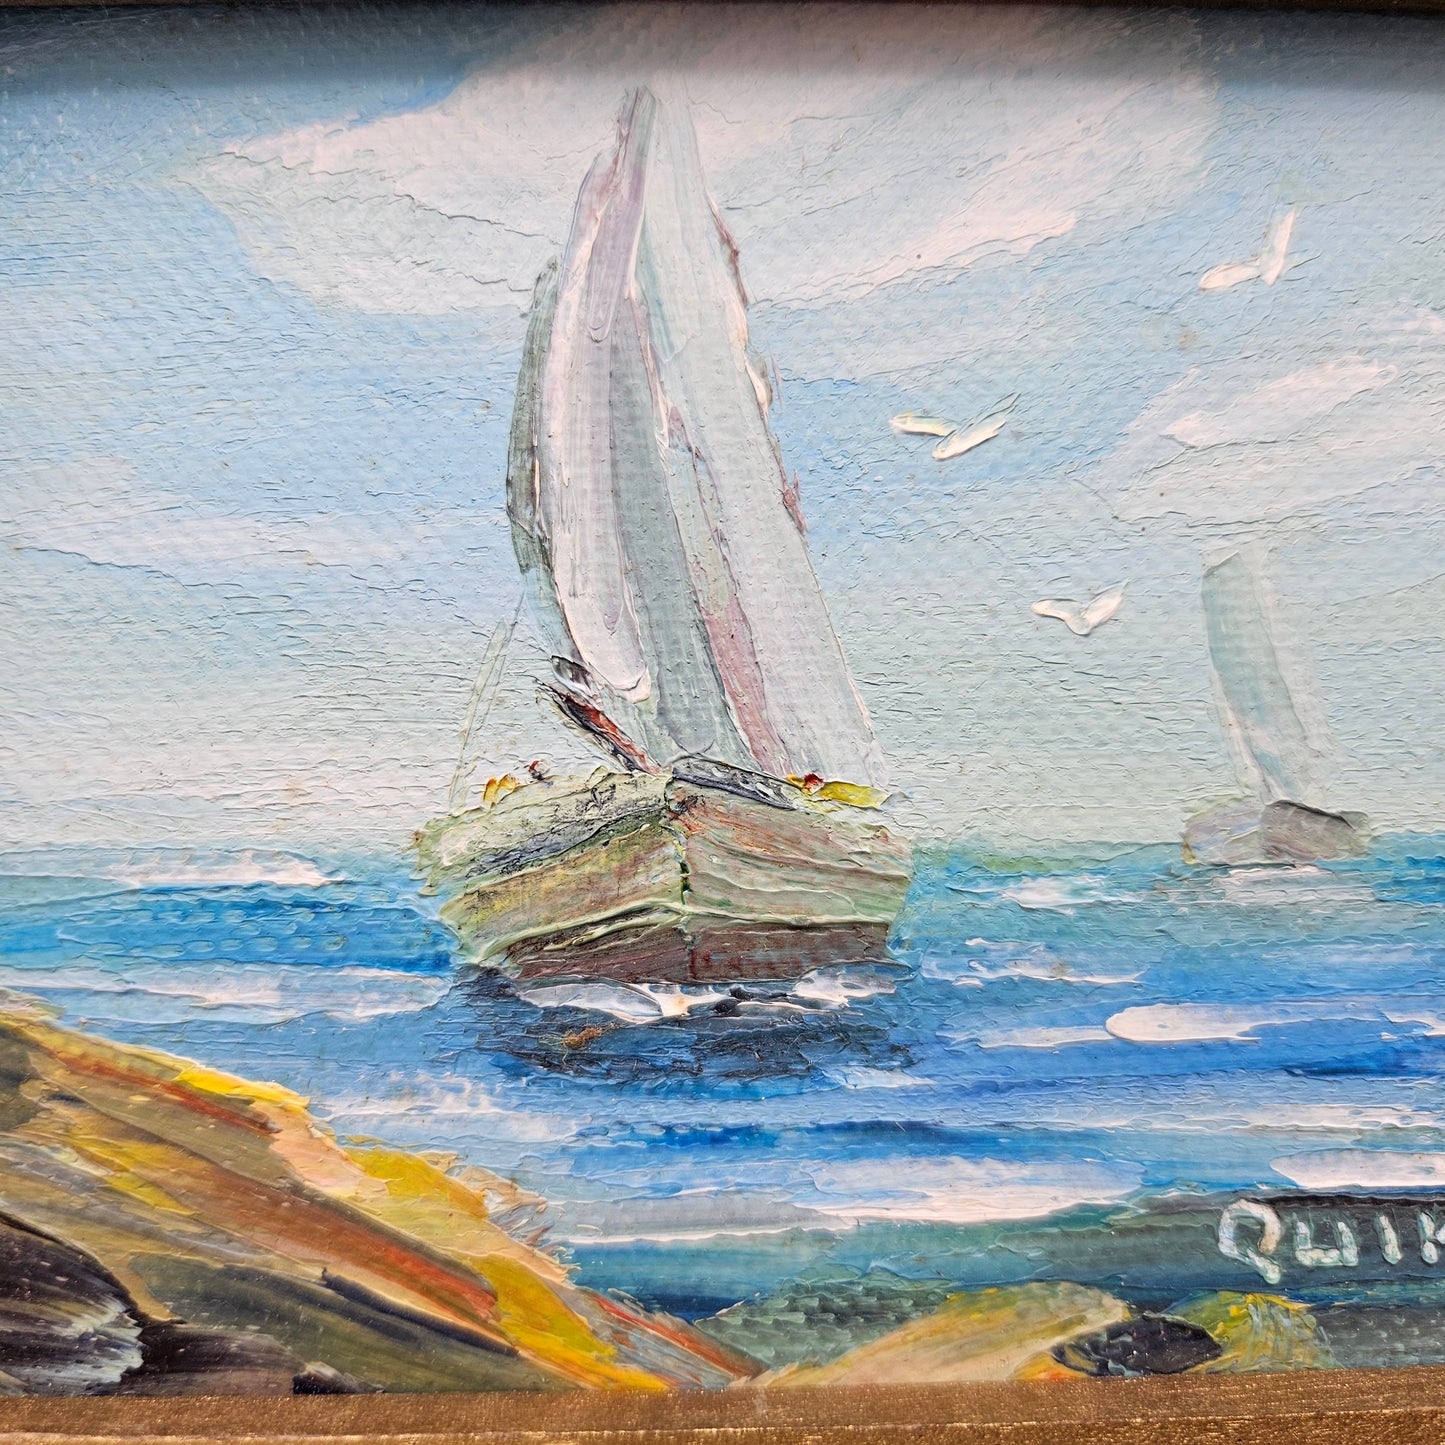 Vintage Miniature Signed Oil Painting on Board of Sailboat